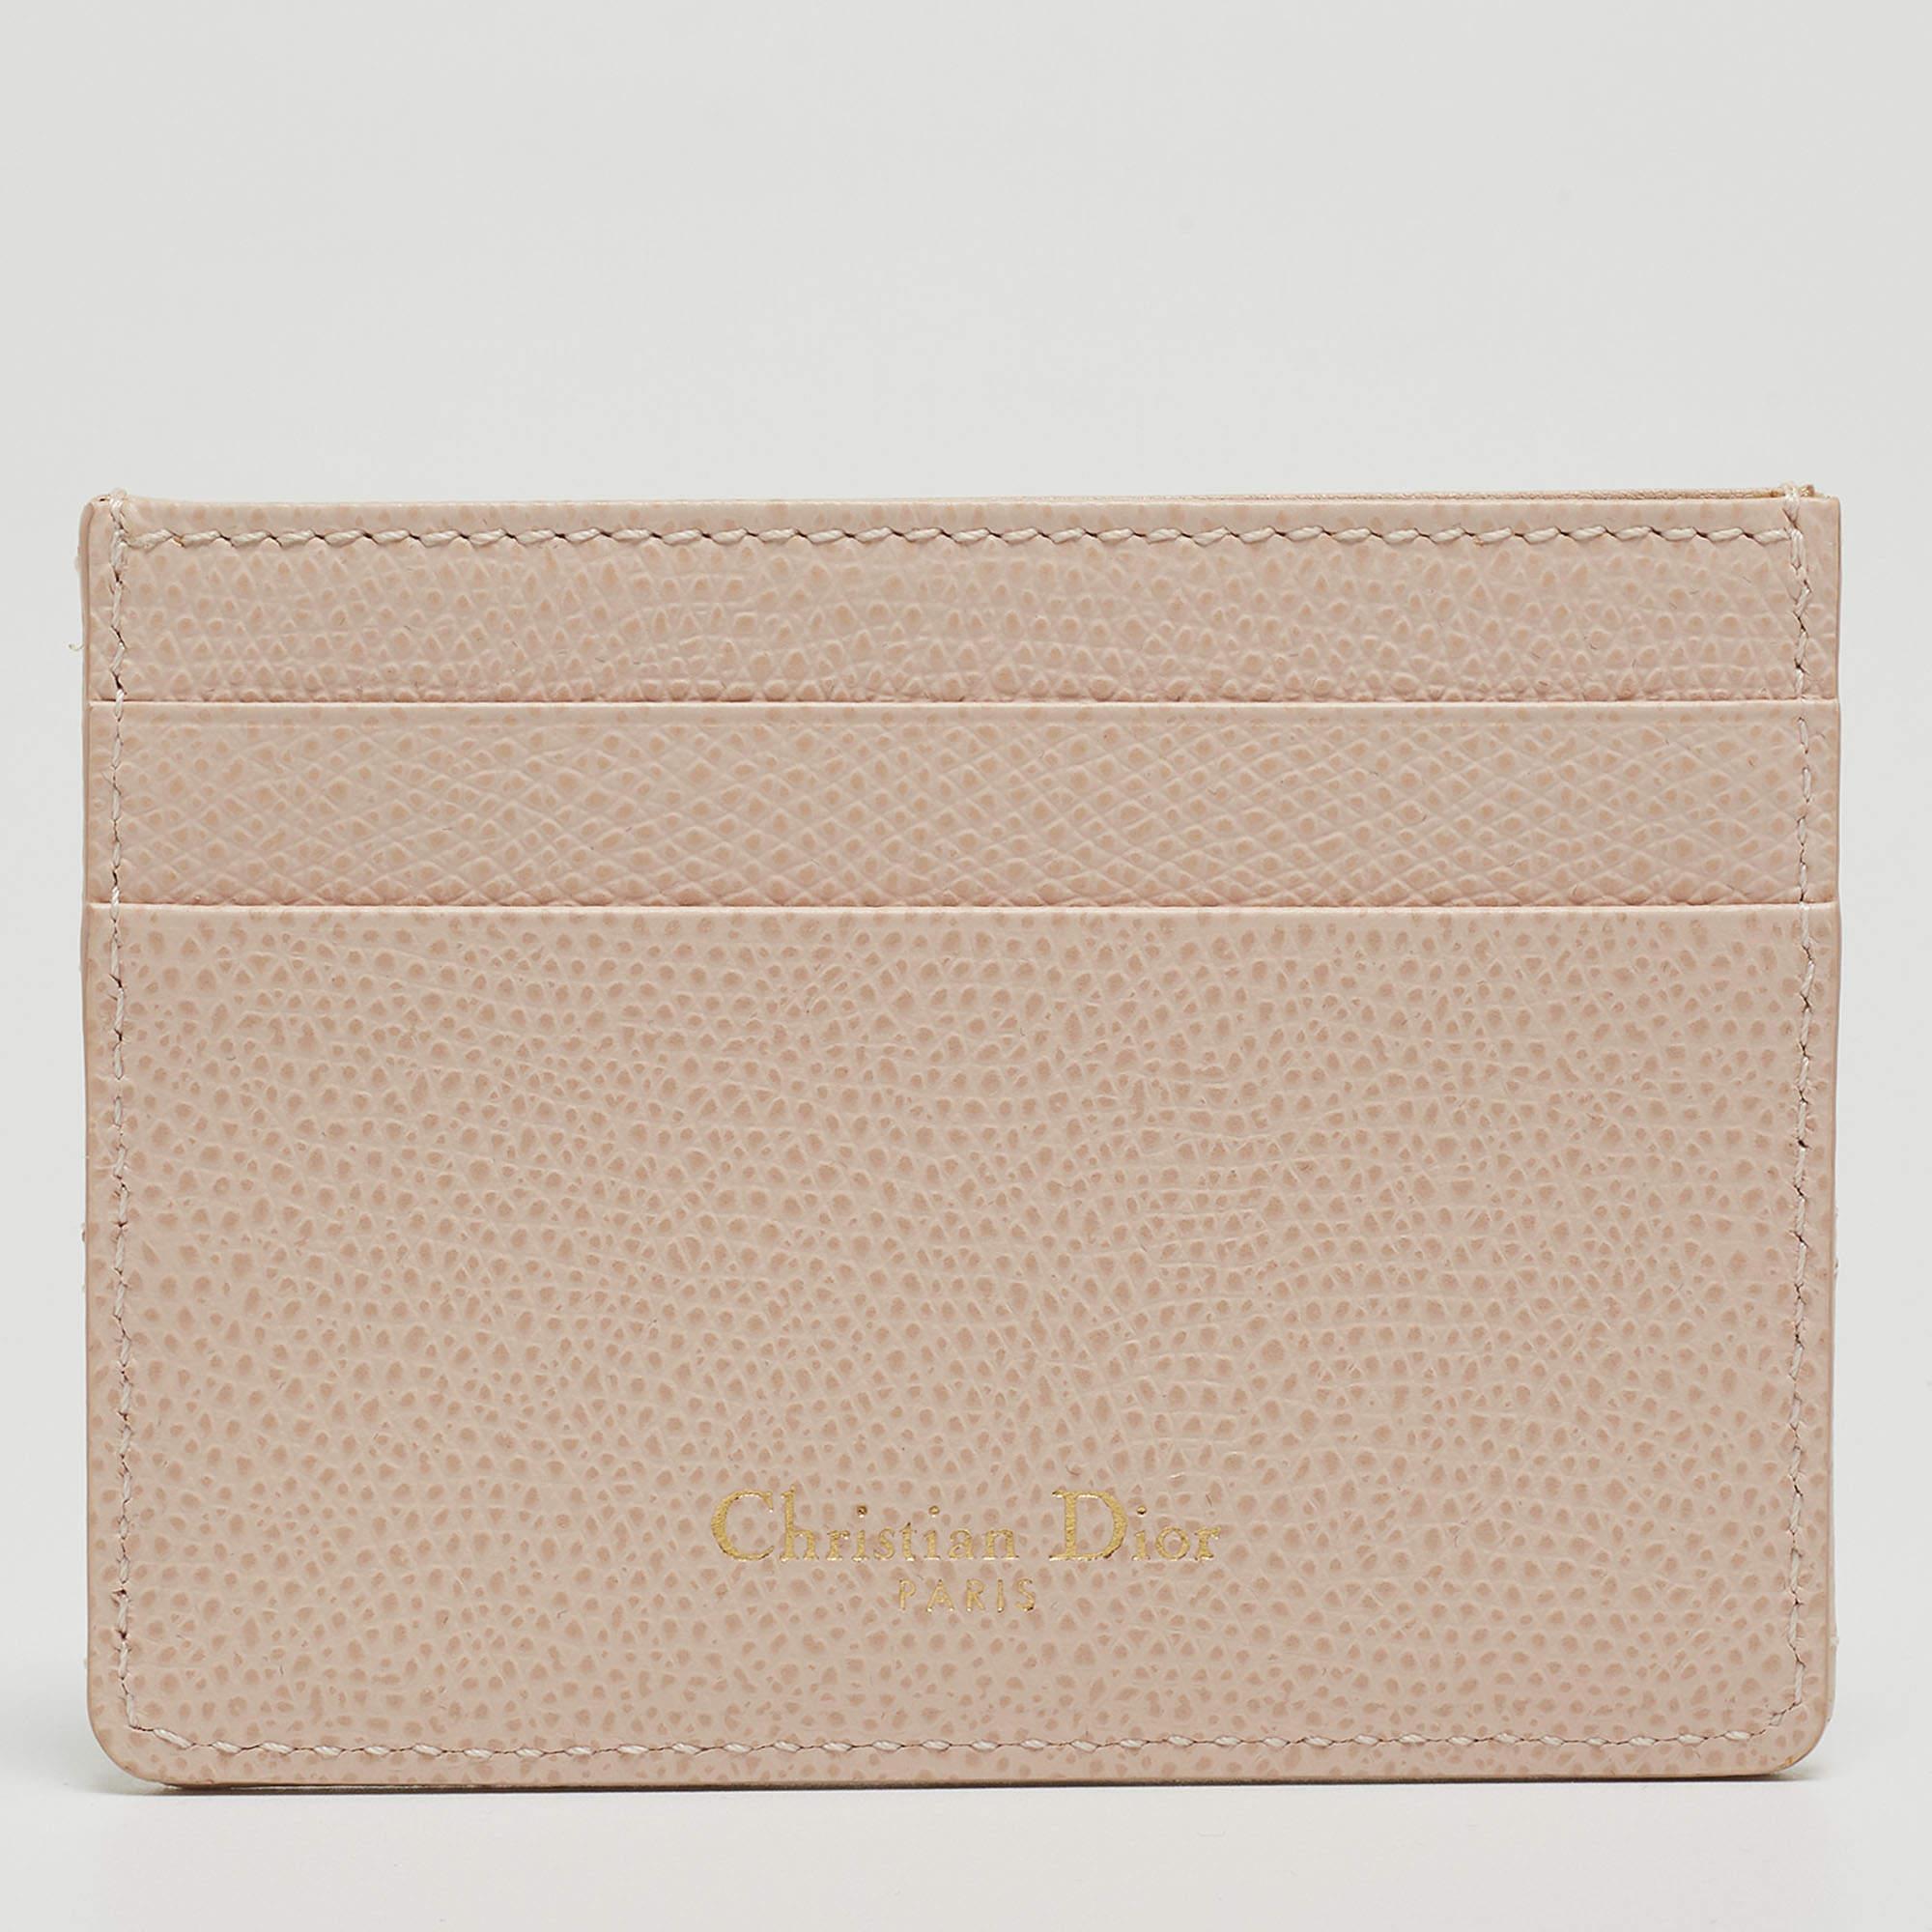 Conveniently designed for everyday use, this card holder is from Dior. Crafted from Cannage leather, the piece flaunts a design in the likeness of the Diorama bag. The interior is well-lined, and the holder features multiple card slots.

